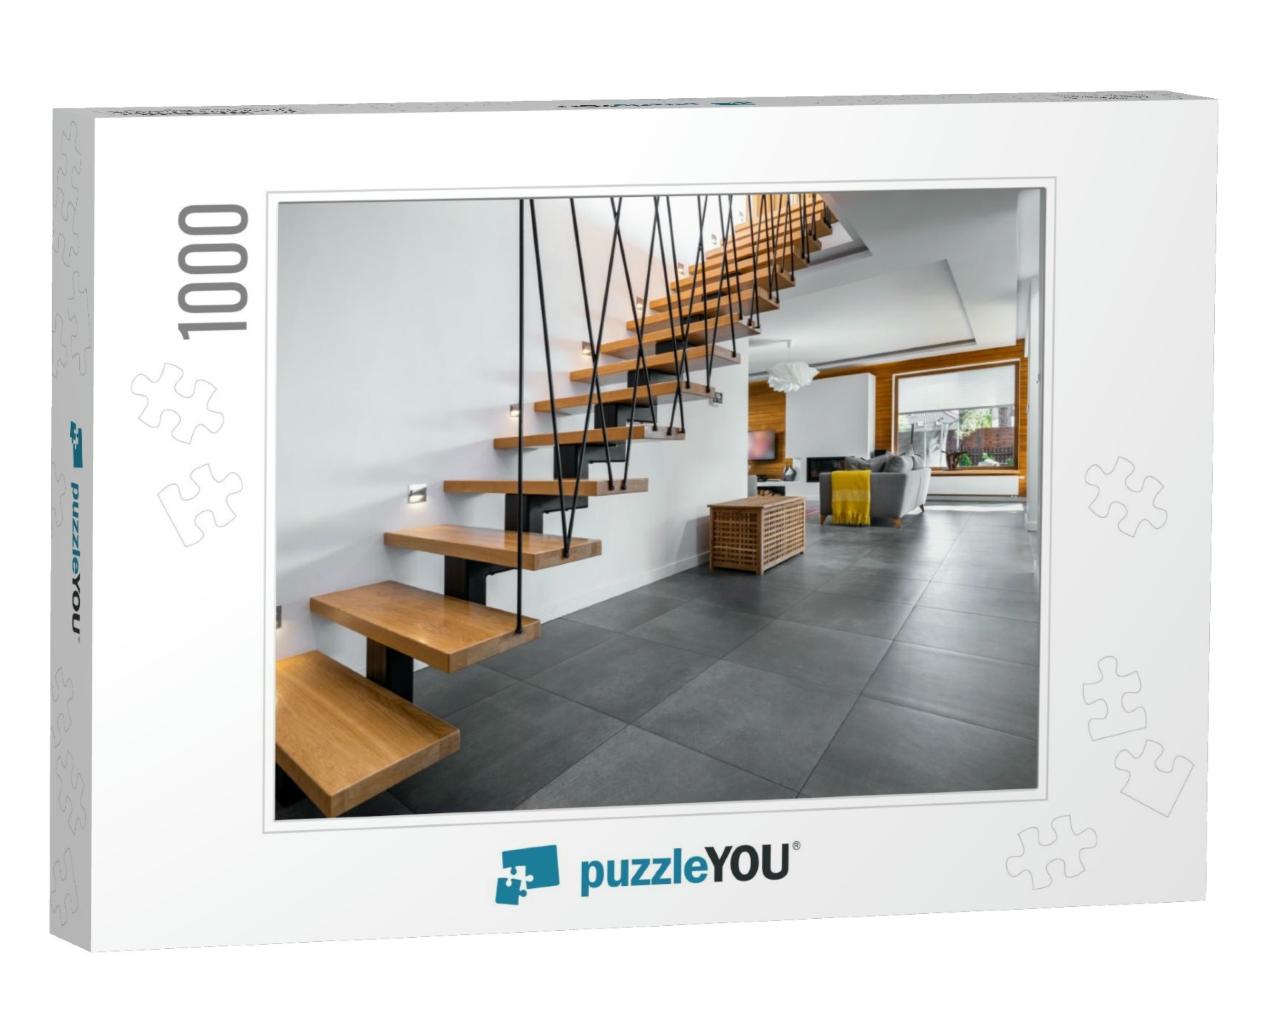 Modern Interior Design - Stairs in Wooden Finishing... Jigsaw Puzzle with 1000 pieces